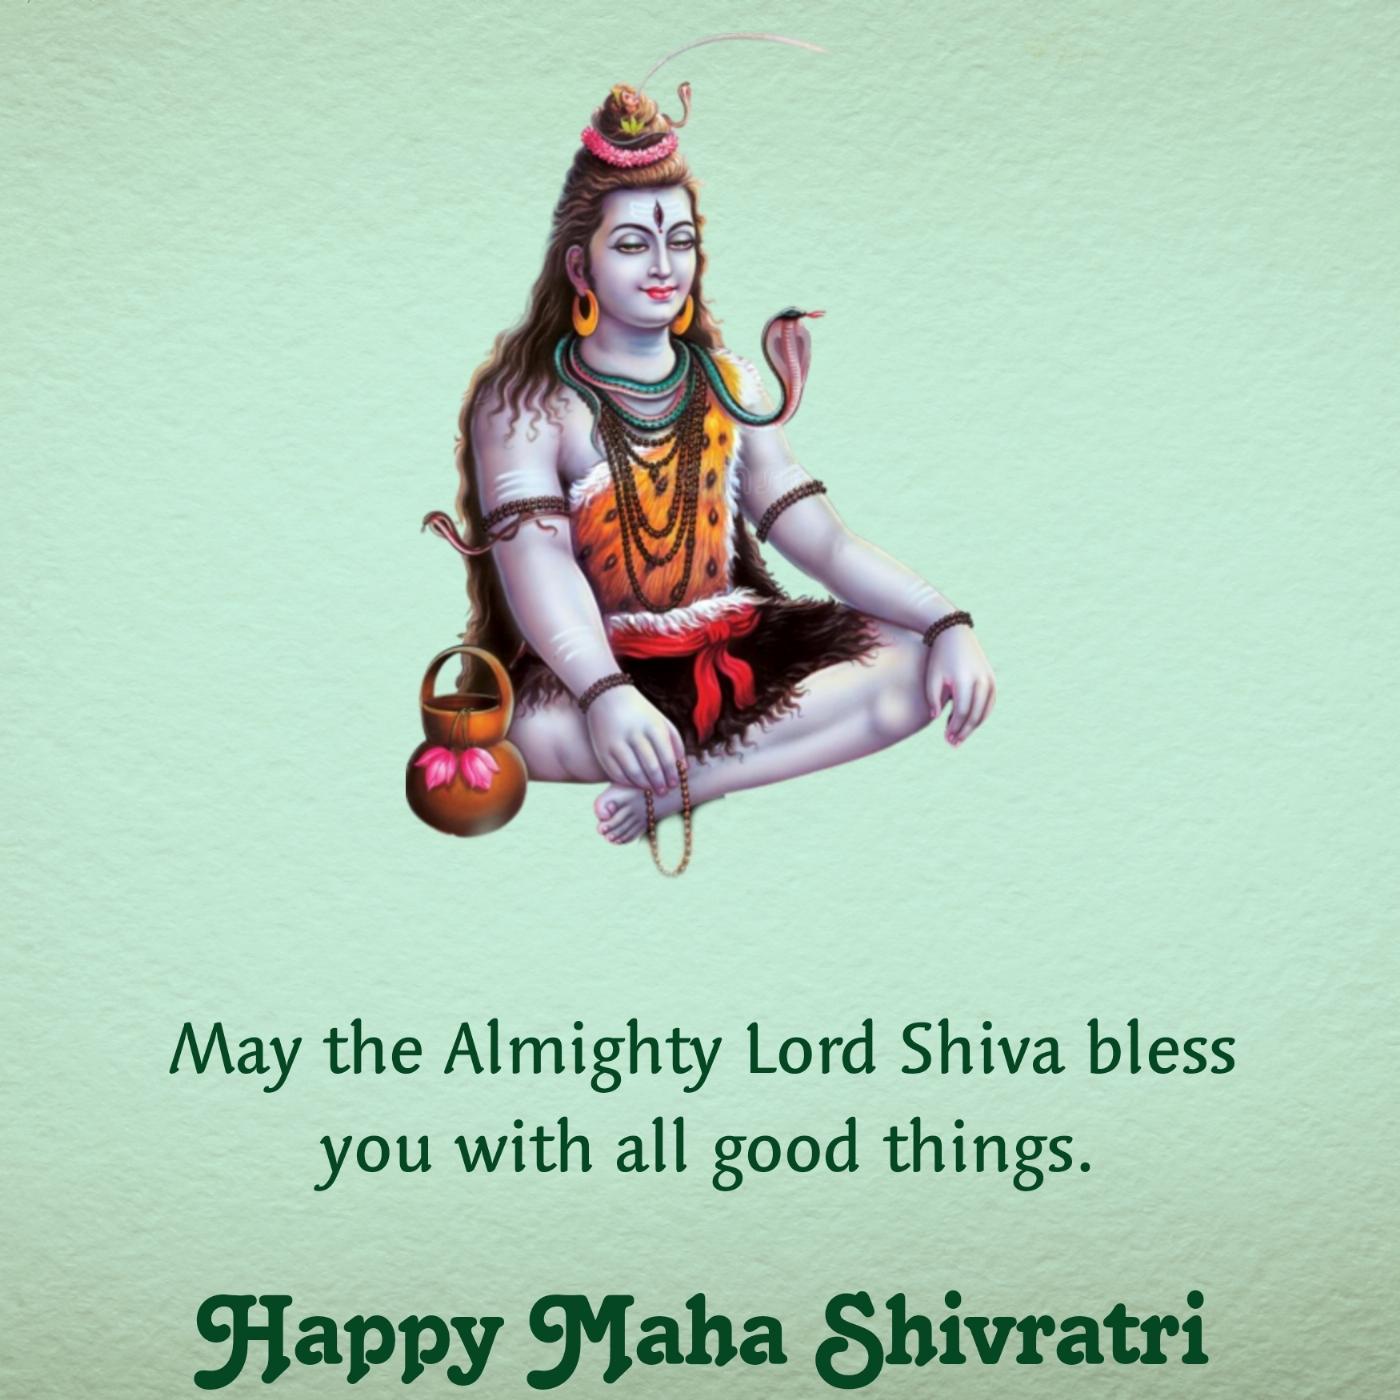 May the Almighty Lord Shiva bless you with all good things